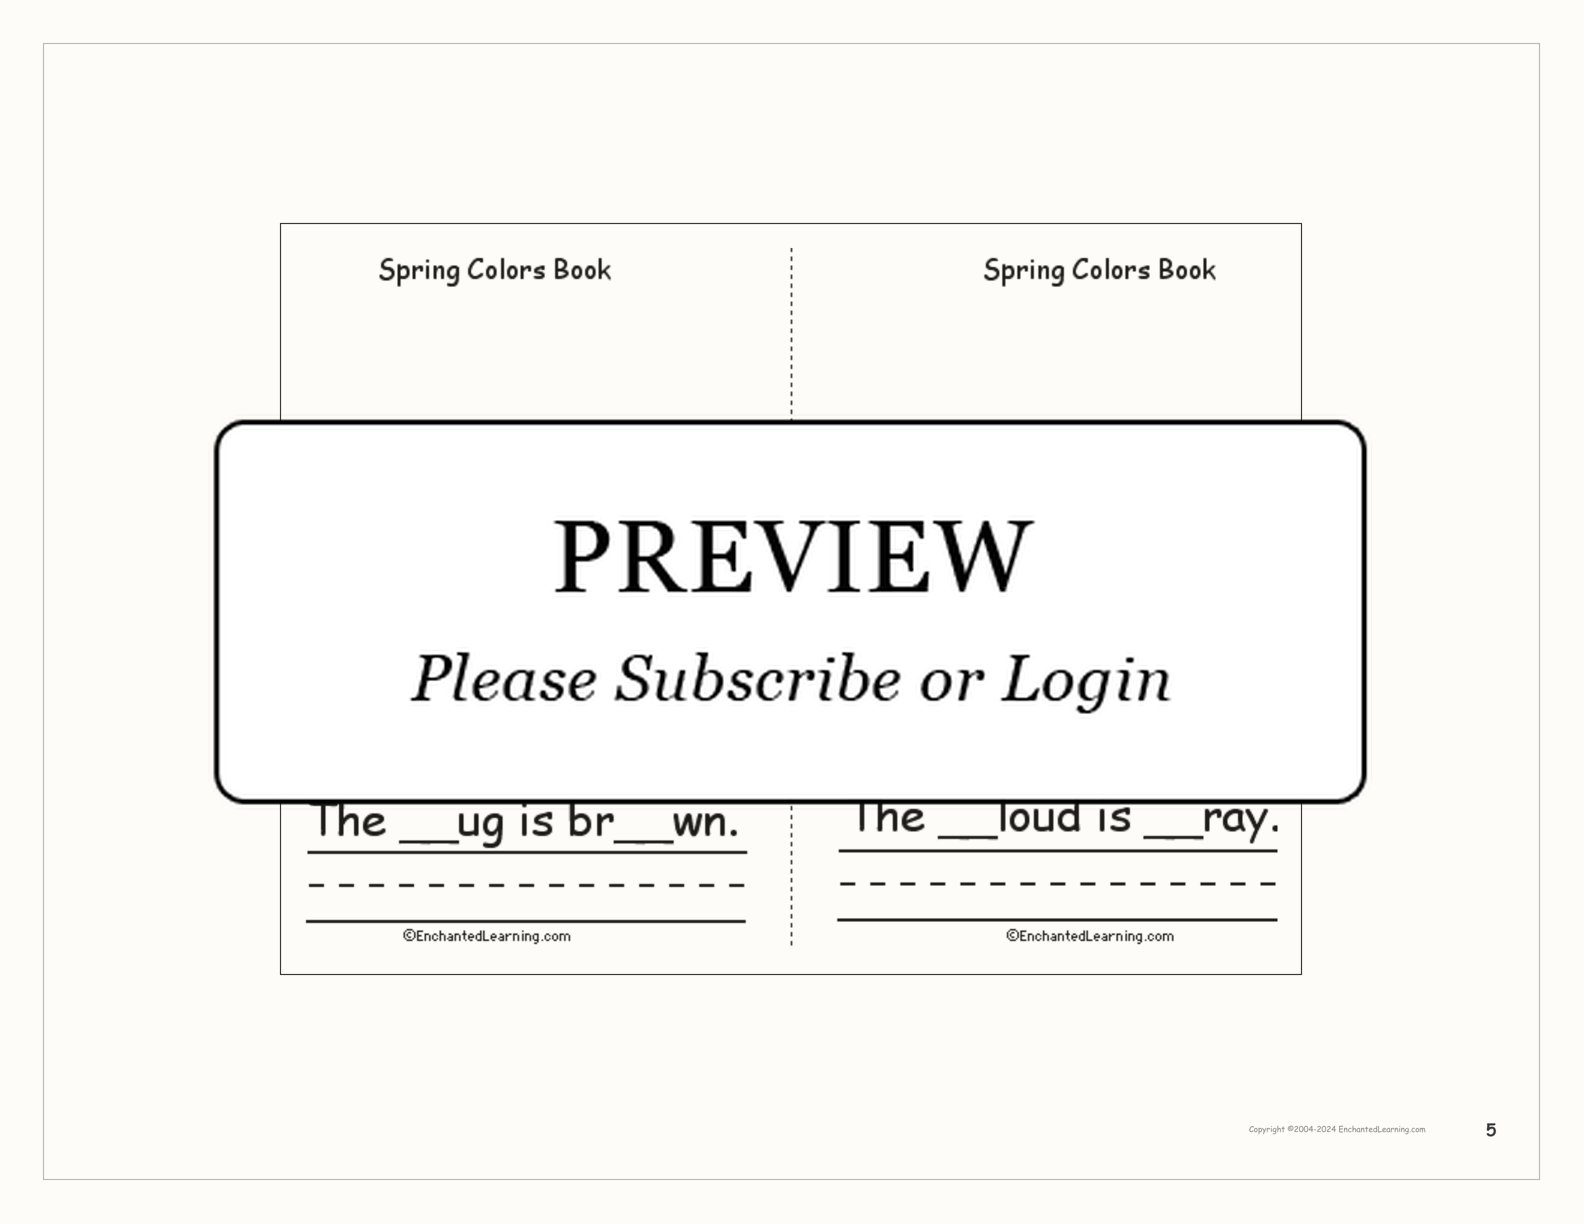 Spring Colors Book interactive worksheet page 5